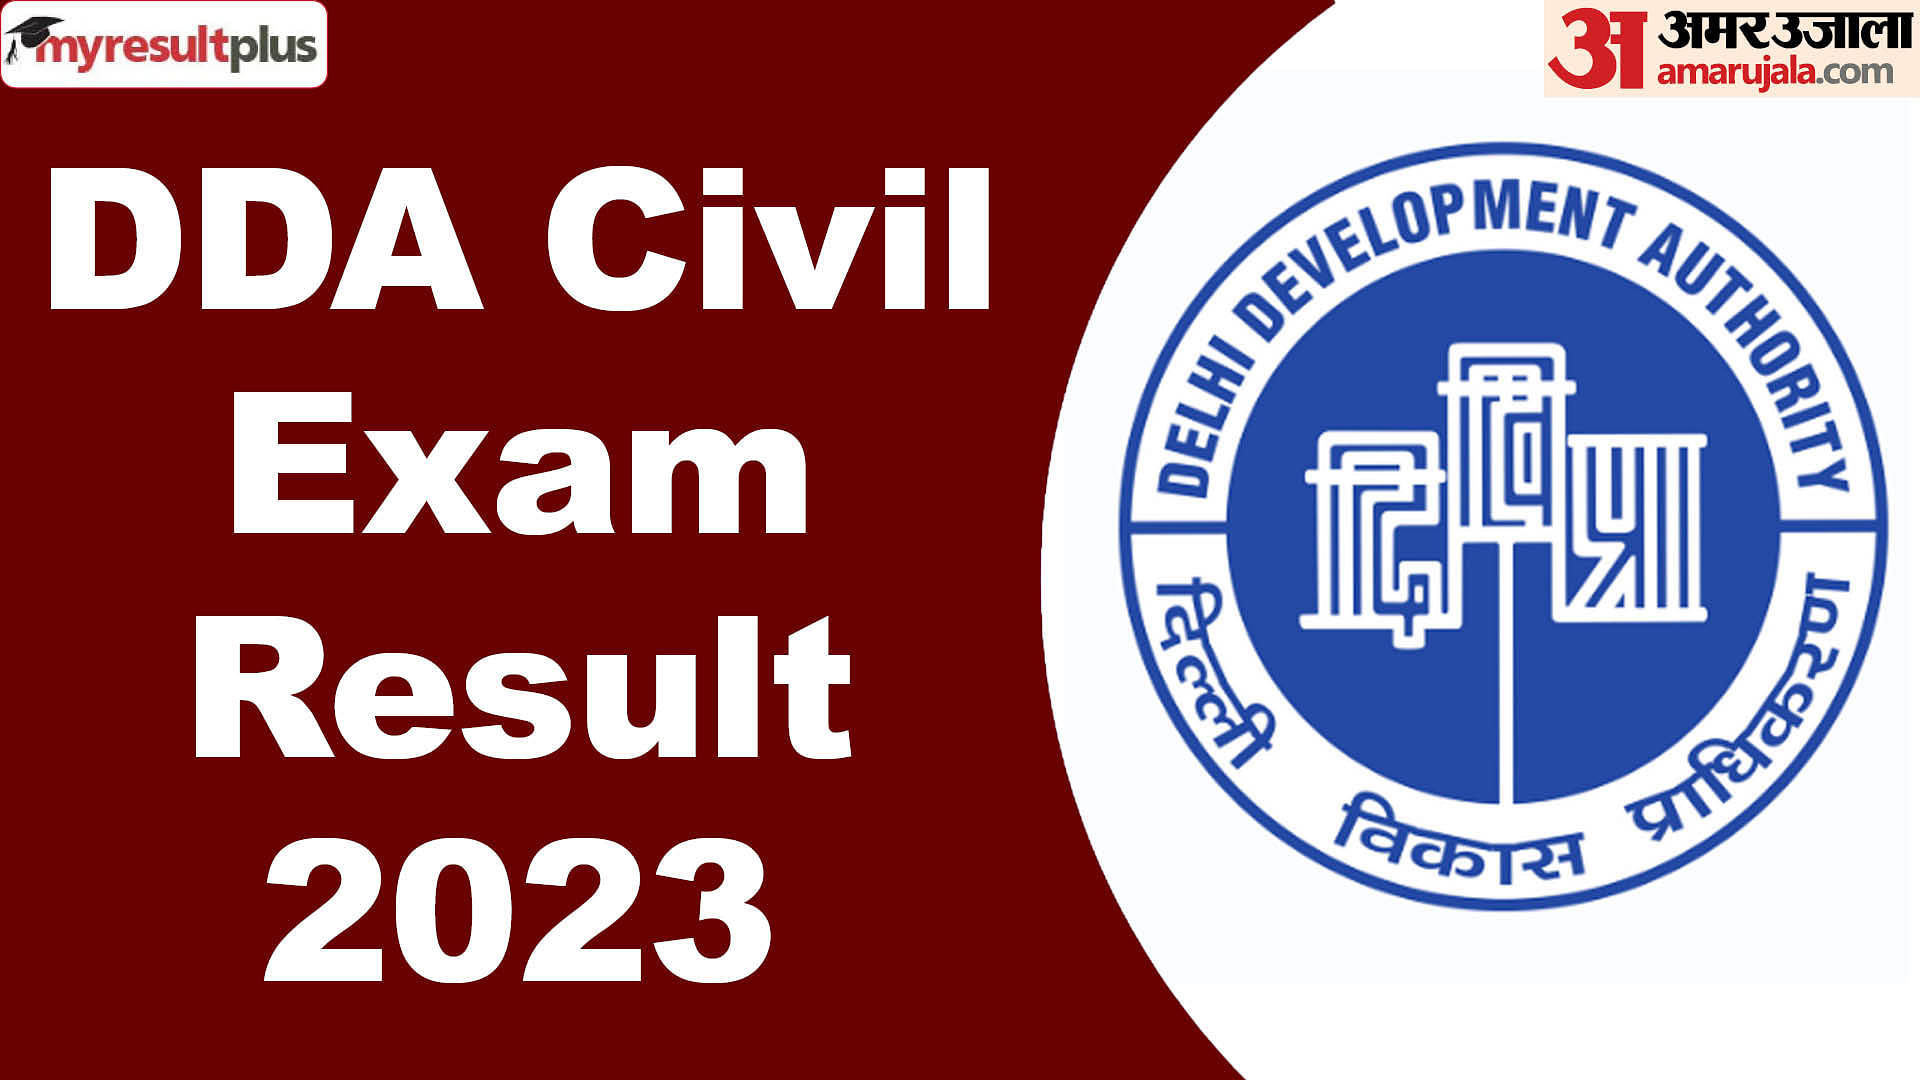 DDA JE civil exam 2023 result declared, Check how to download and selection process here